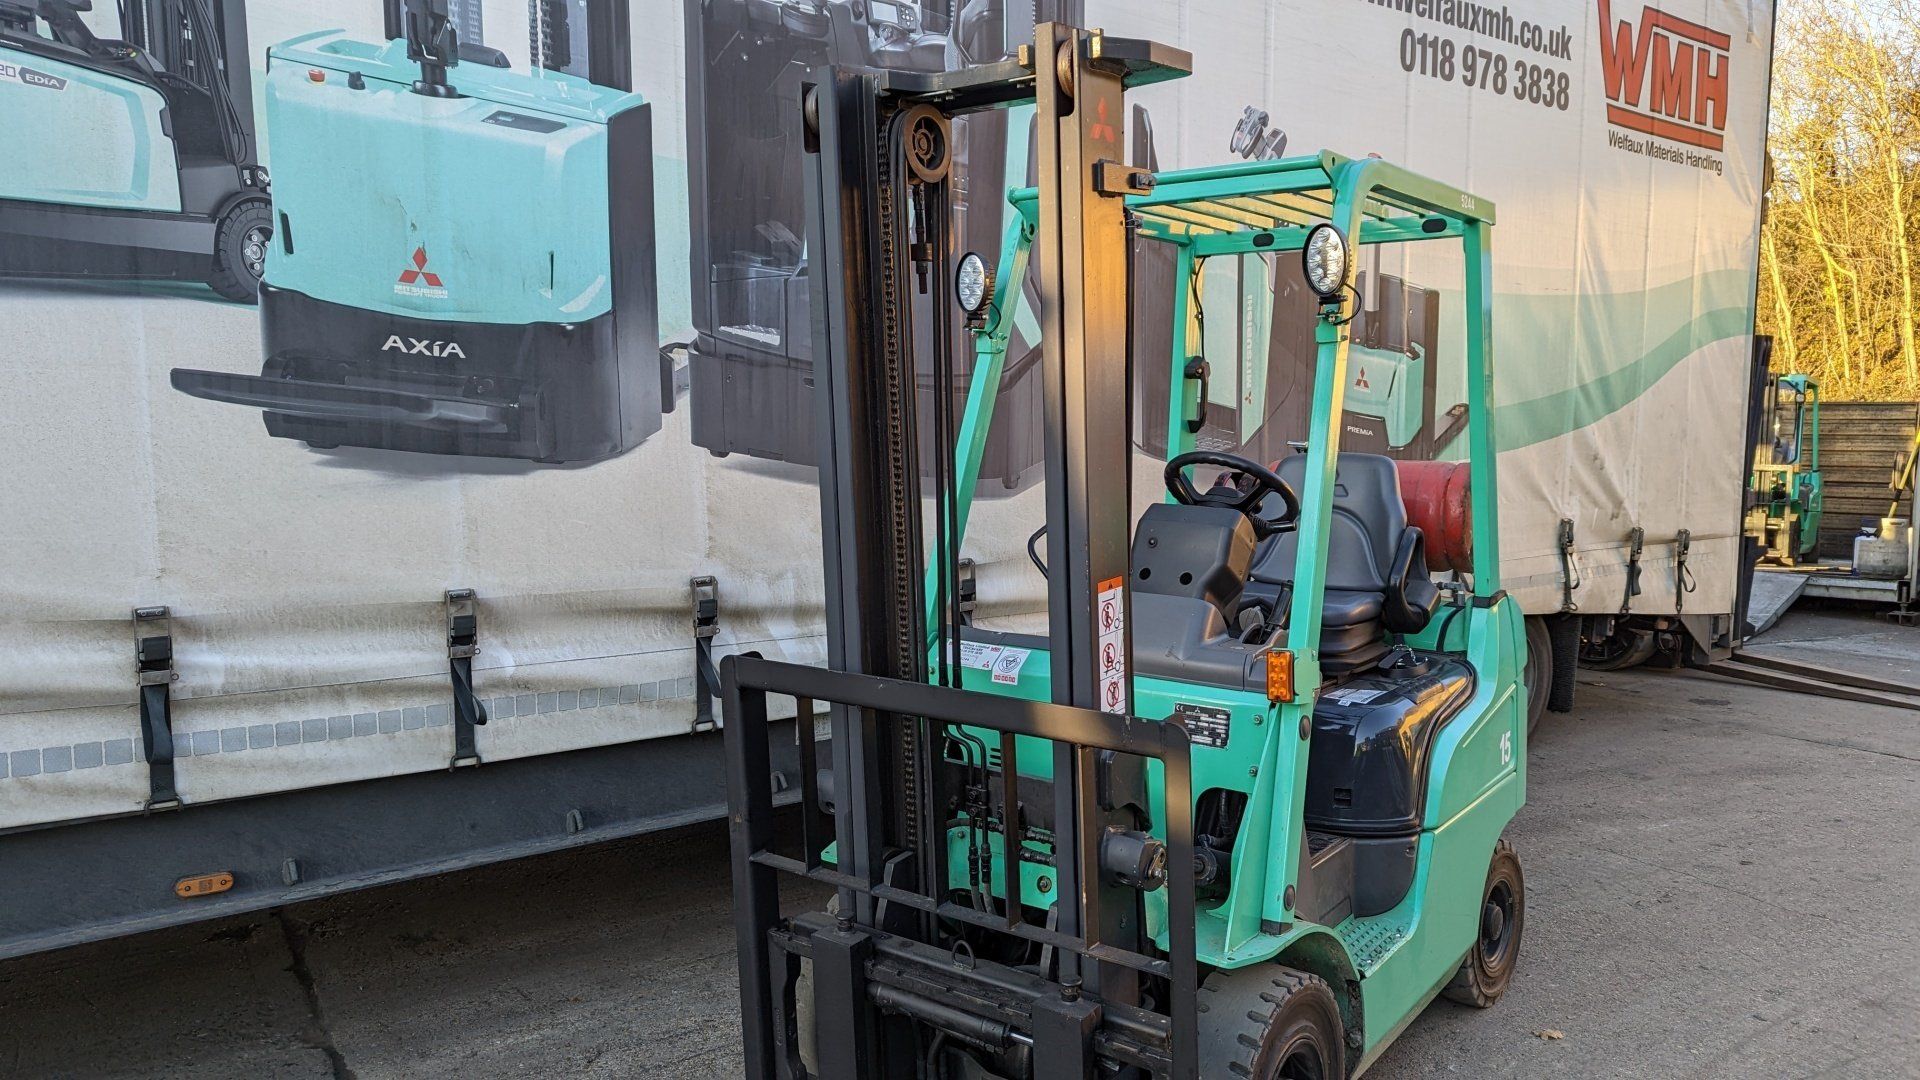 A green forklift is parked in front of a large trailer.